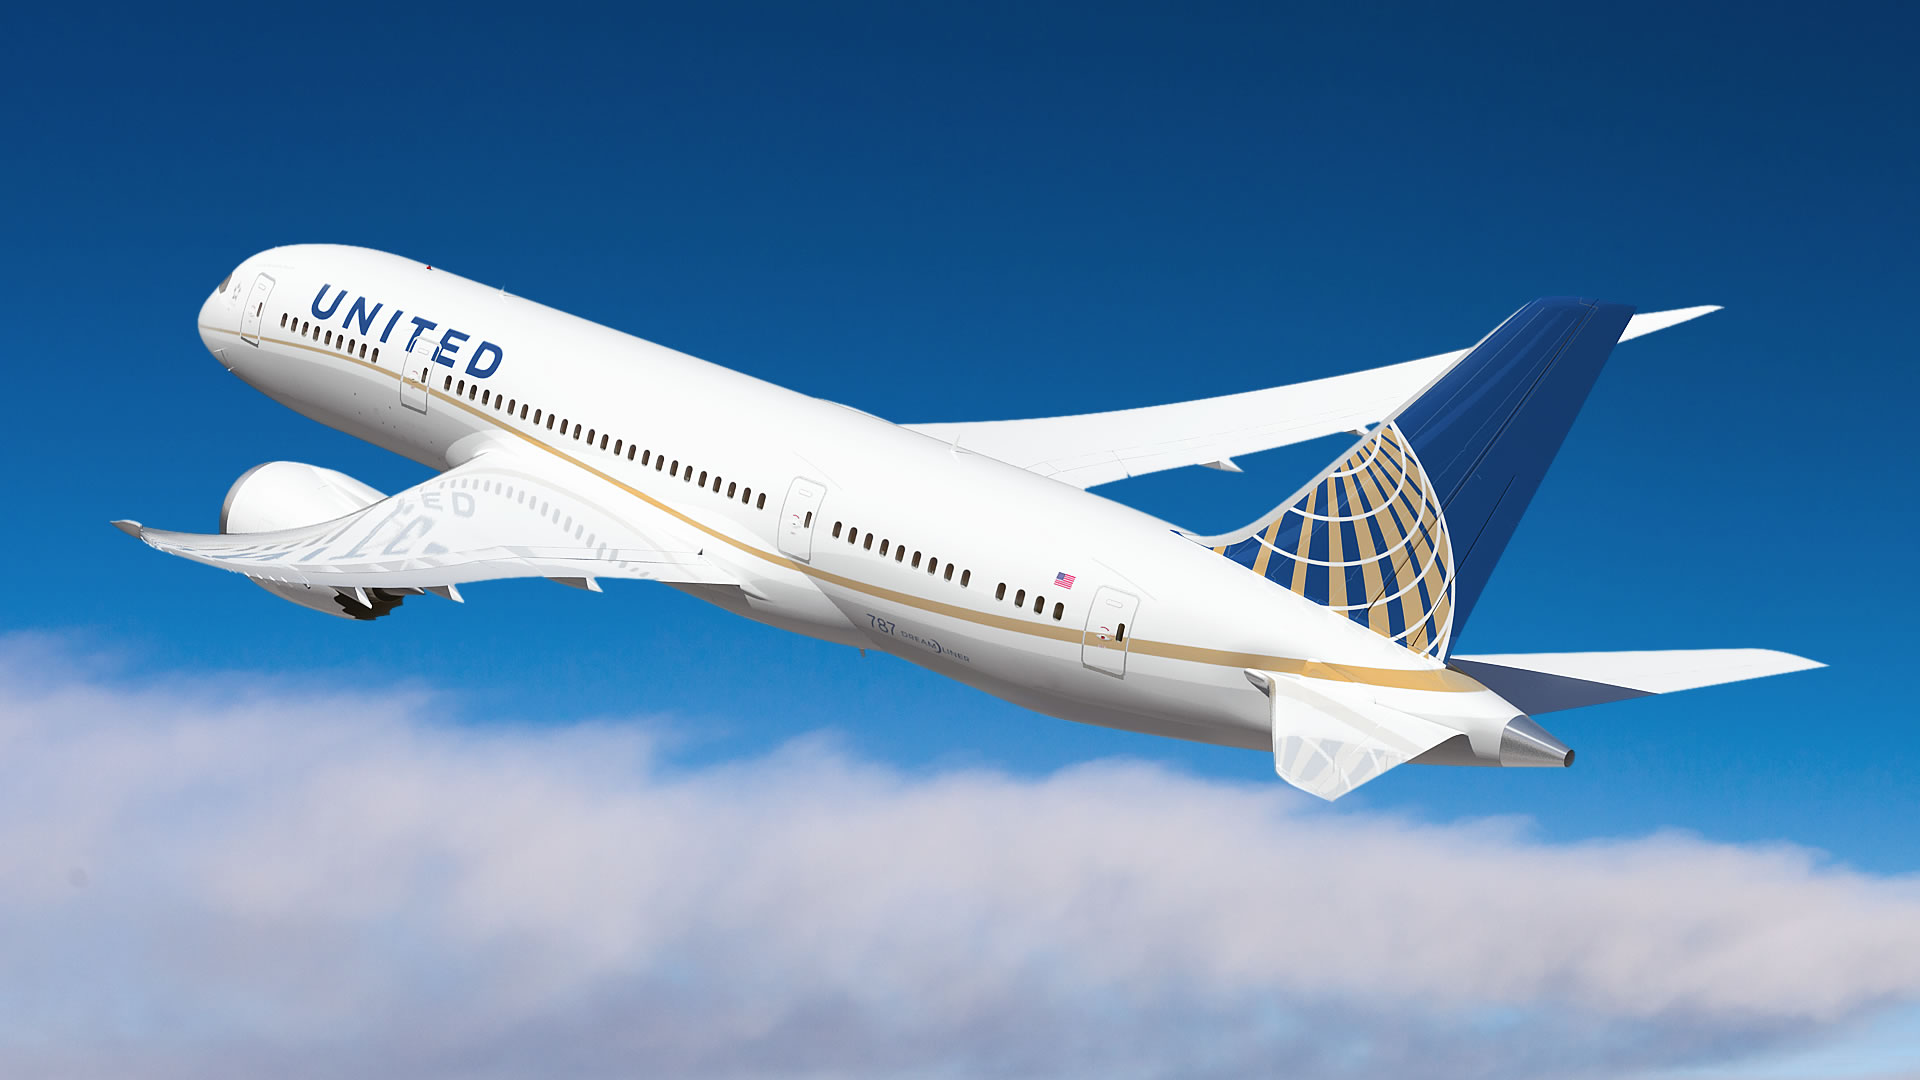 United sees a clear path to recovery despite first quarter loss